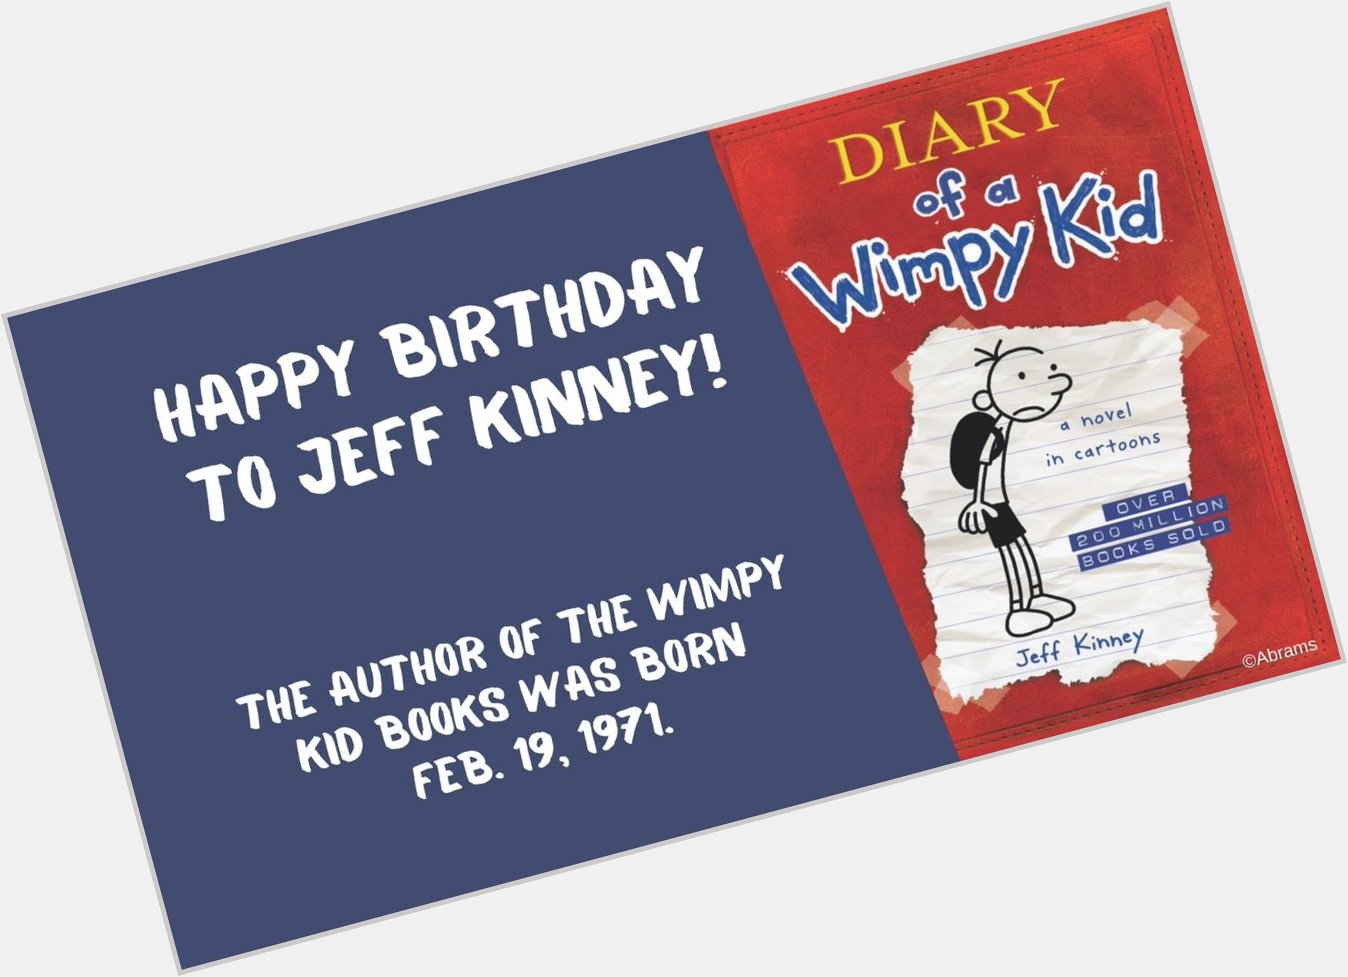 Happy birthday to Jeff Kinney, author of the Diary of a Wimpy Kid books. It\s a milestone!  